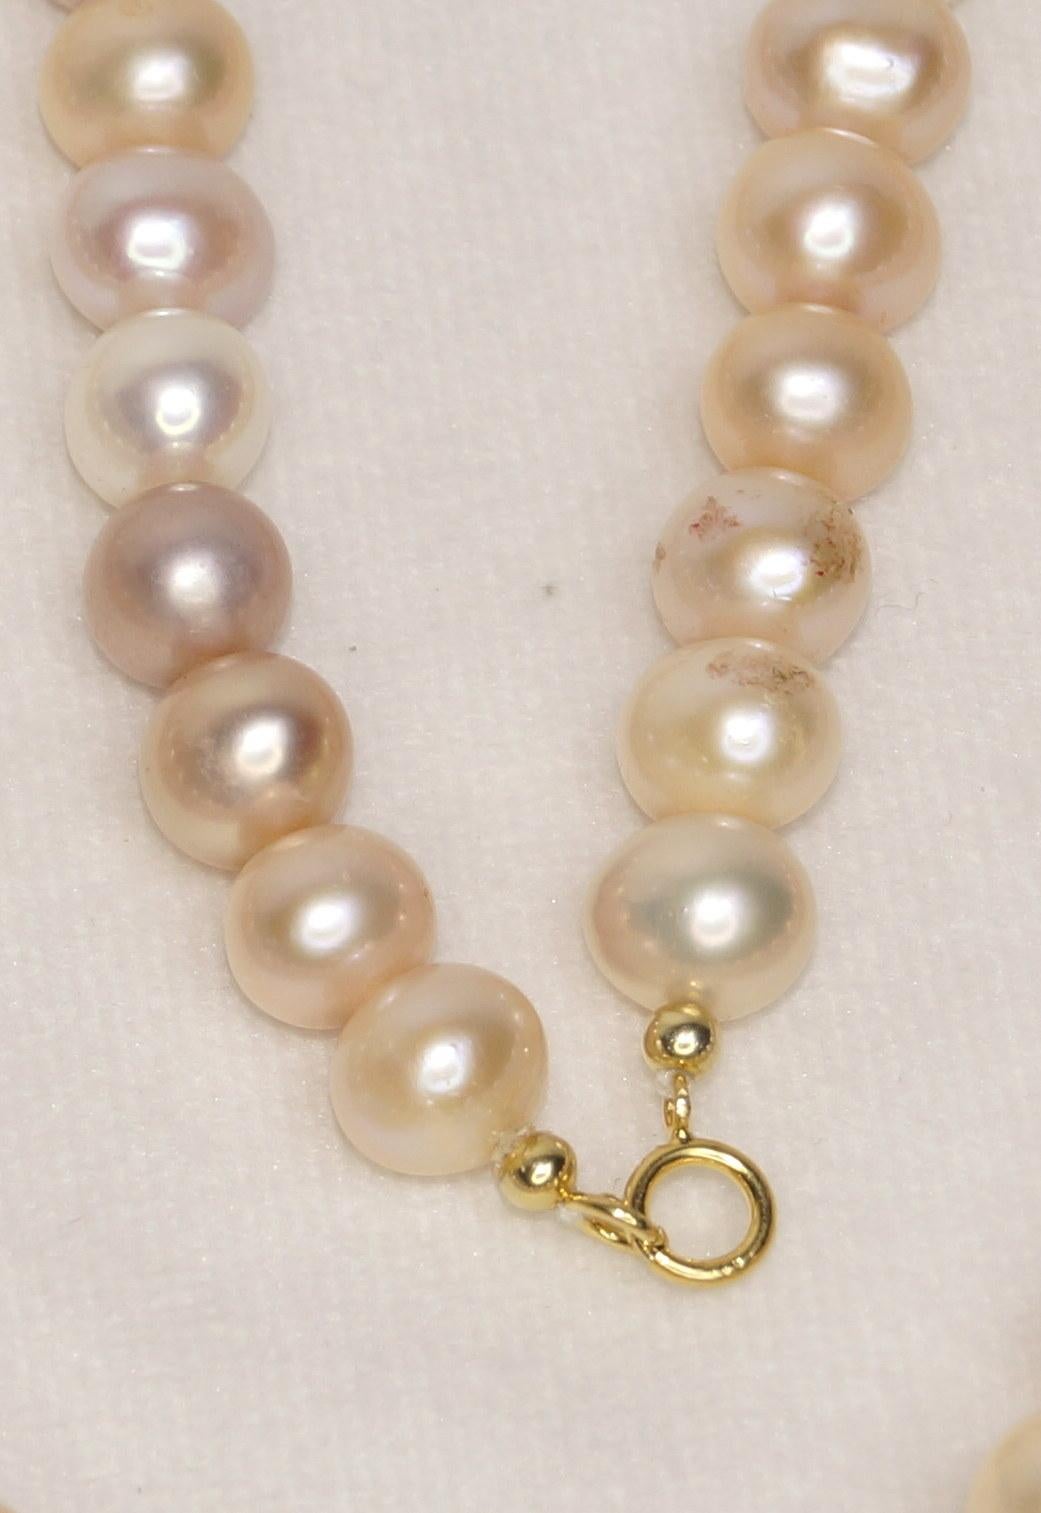 14k Gold Golden Cream mix Pearl necklace 14mm Freshwater Round Pearl necklace 4